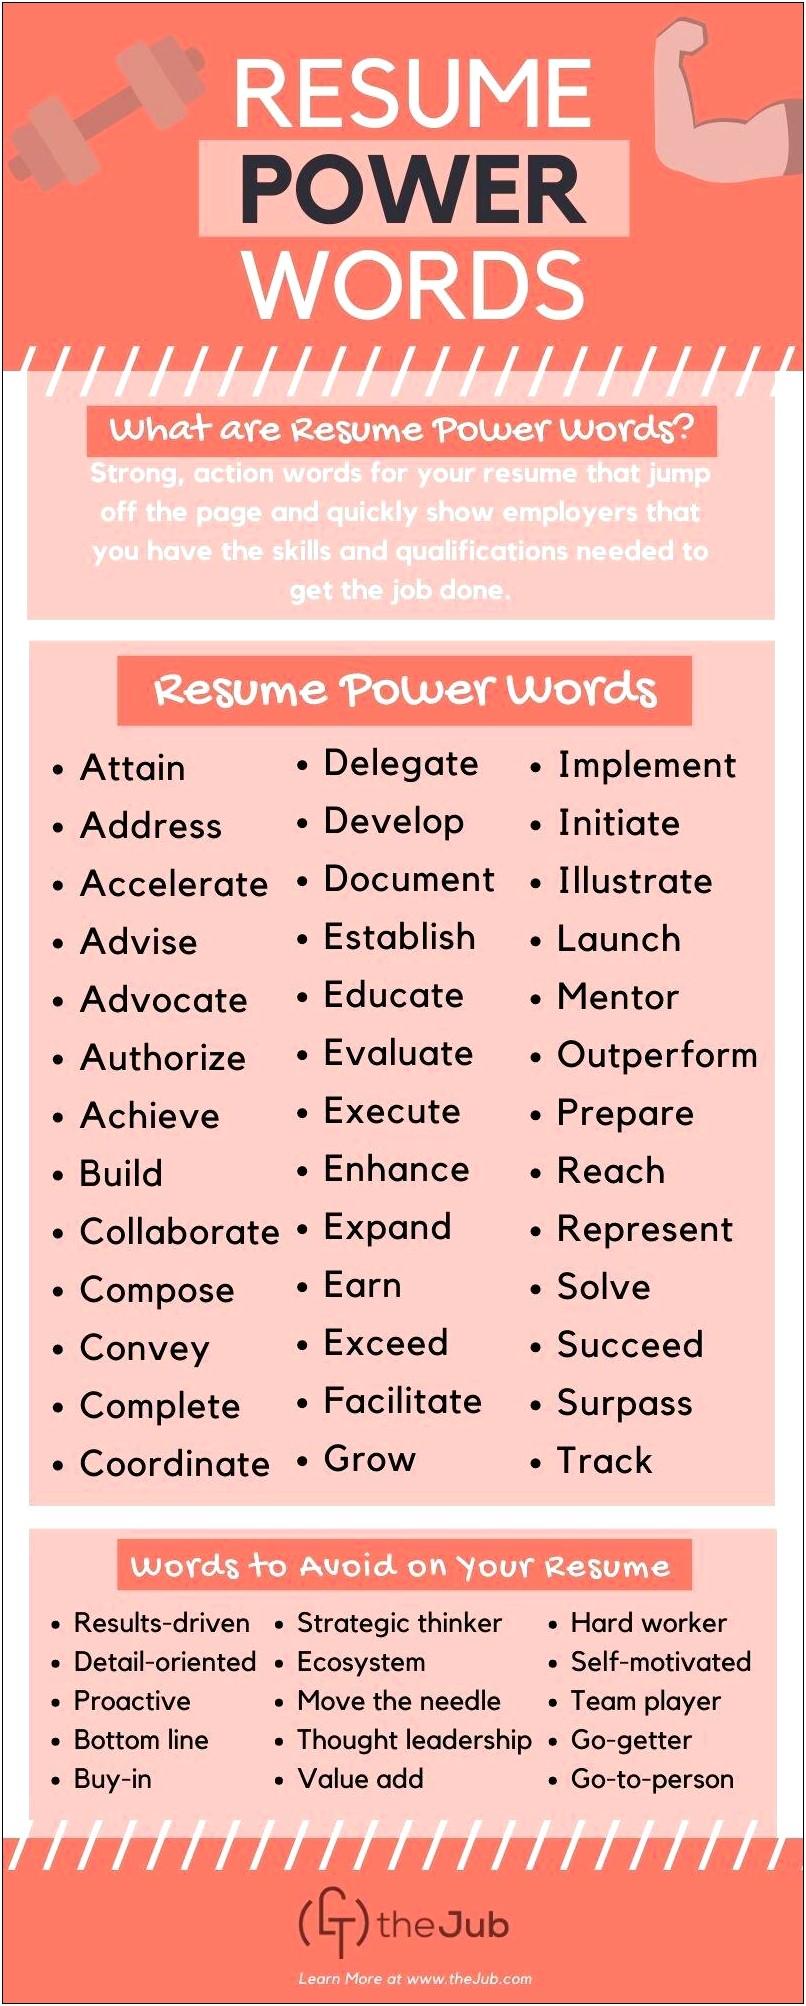 Action Verbs And Power Words For Your Resume